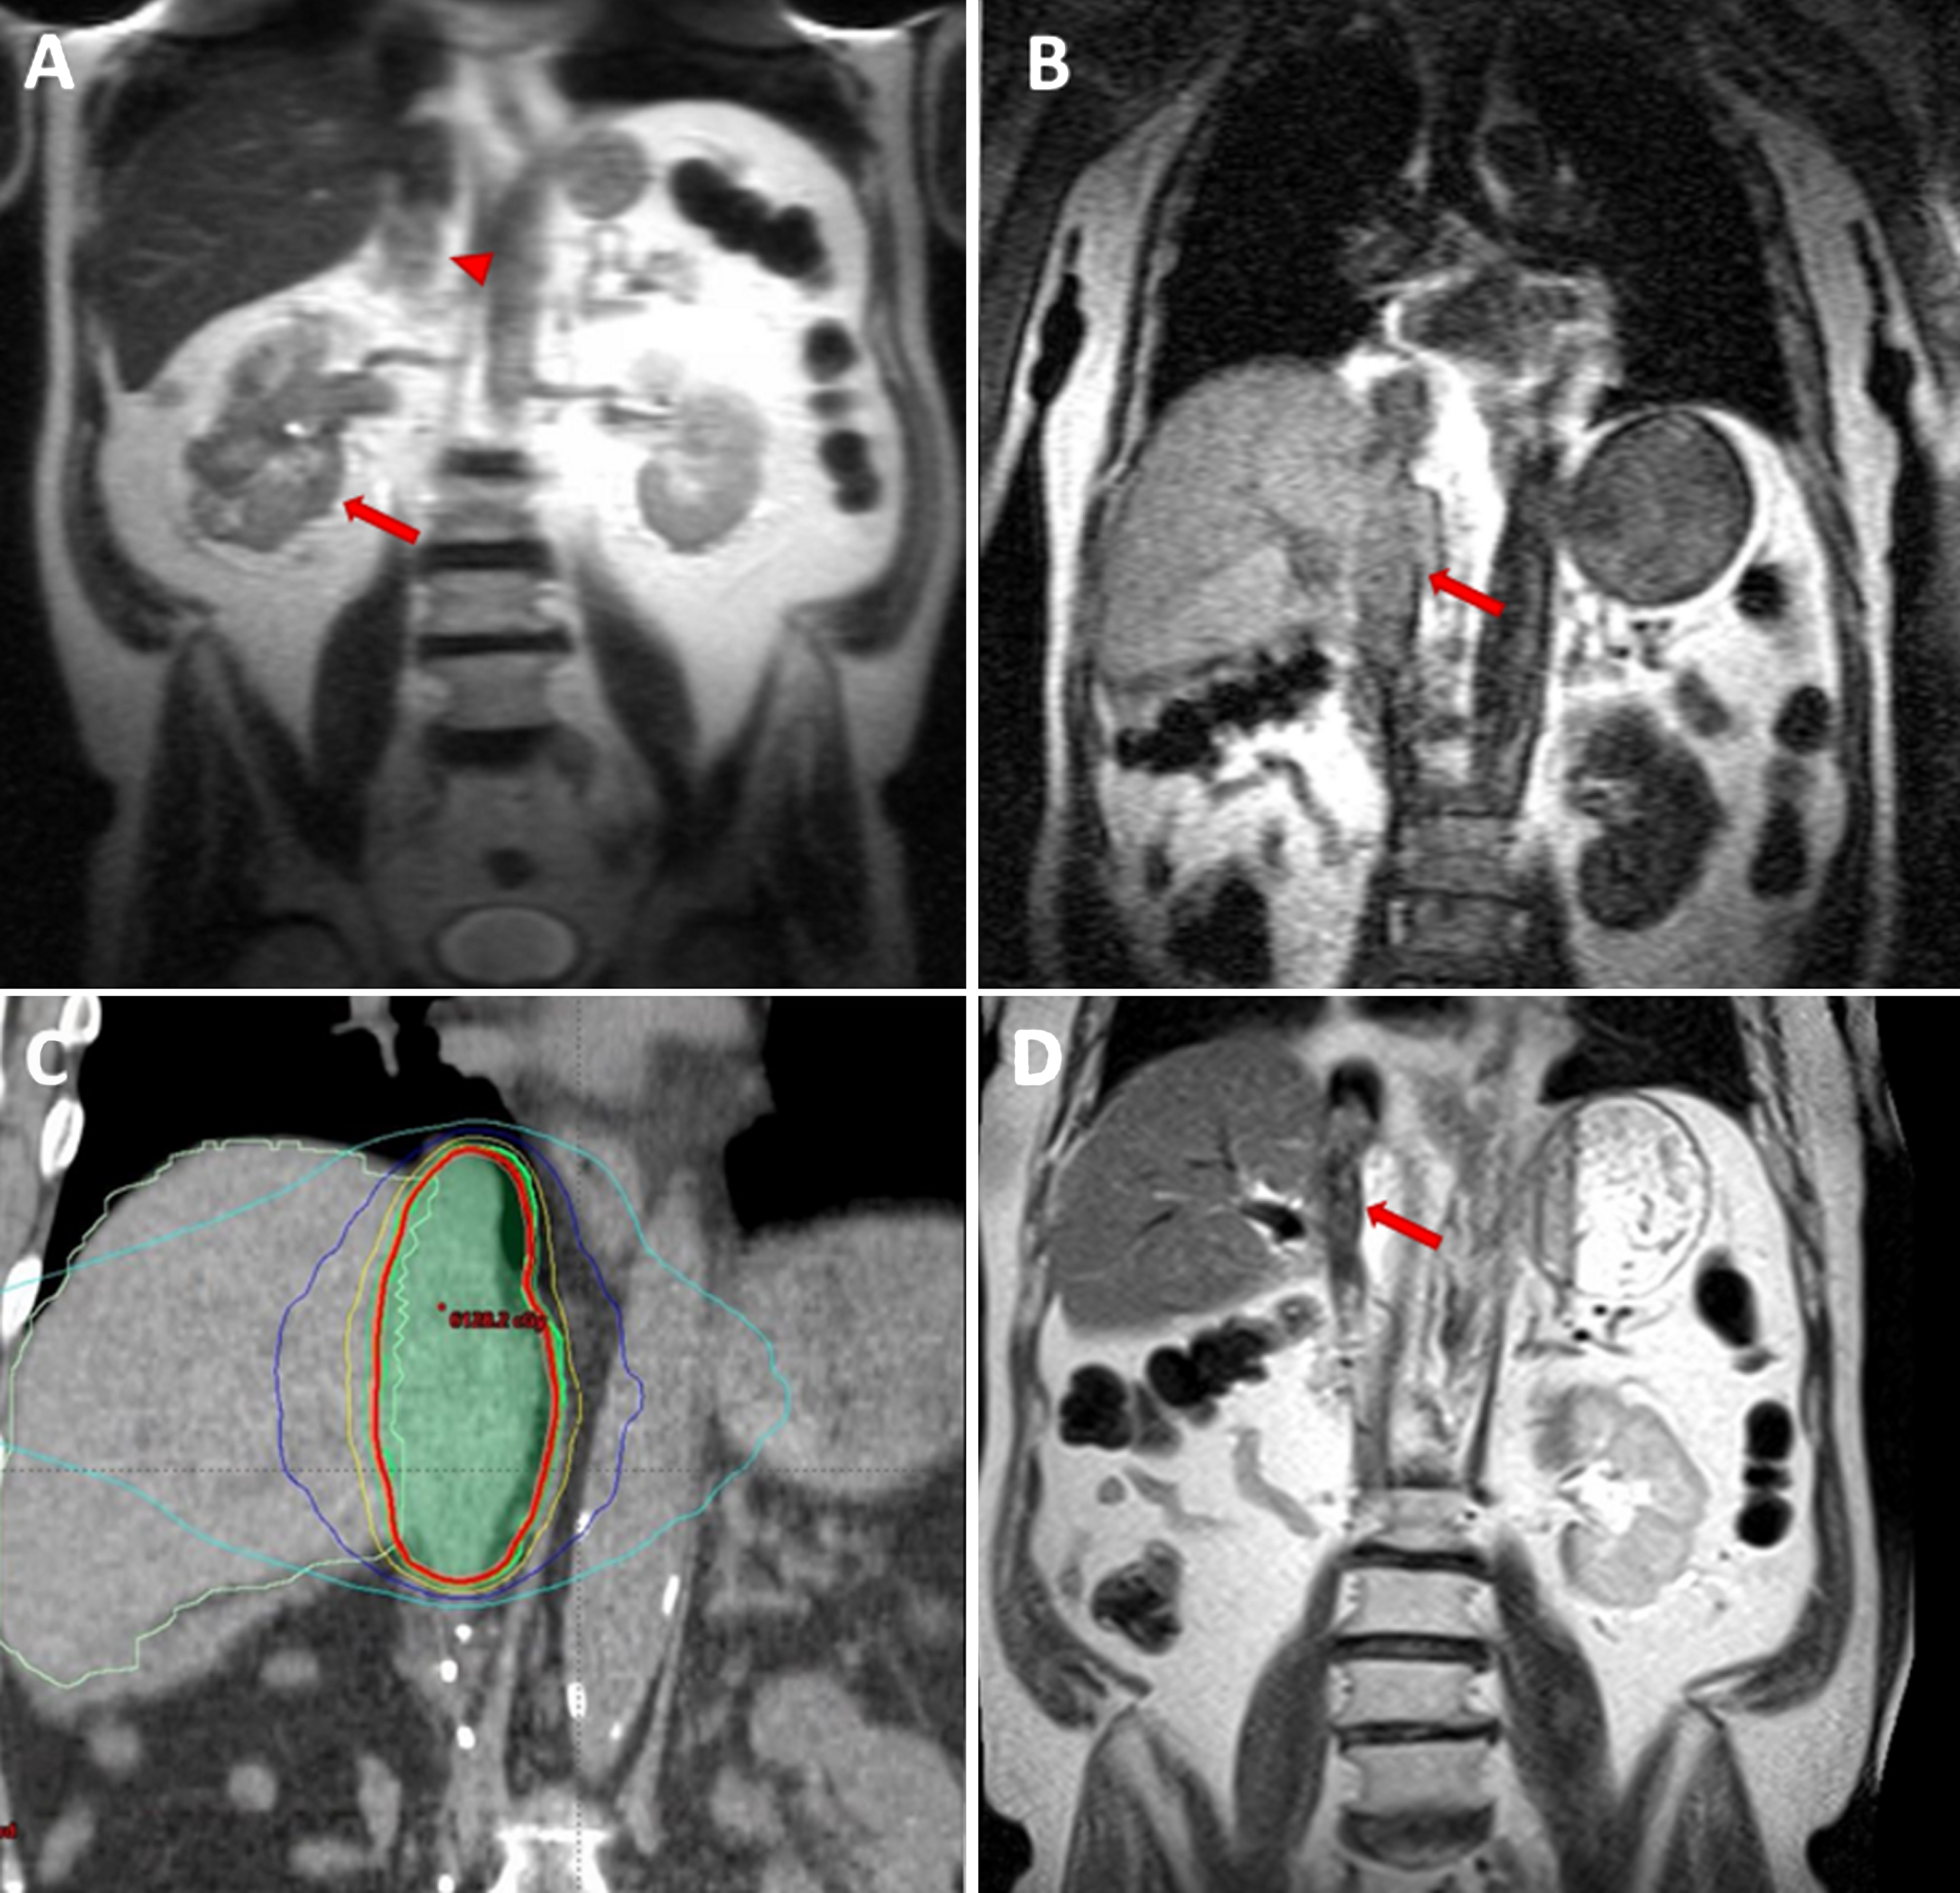 MRI images of a 74 y/o man with right renal mass (arrow) and tumor thrombus (arrow head) extending to the right atrium (level IV) (A). After radical nephrectomy and thrombectomy, IVC tumor thrombus recurred (arrow) (B). SBRT (5×10 Gy) was delivered to the thrombus area – CT images demonstrate radiation planning (red contour representing the 95% iso-dose line) (C). Follow-up MRI, 16 months after completion of SBRT showing a decrease in IVC tumor thrombus size and enhancement (arrow) (D).